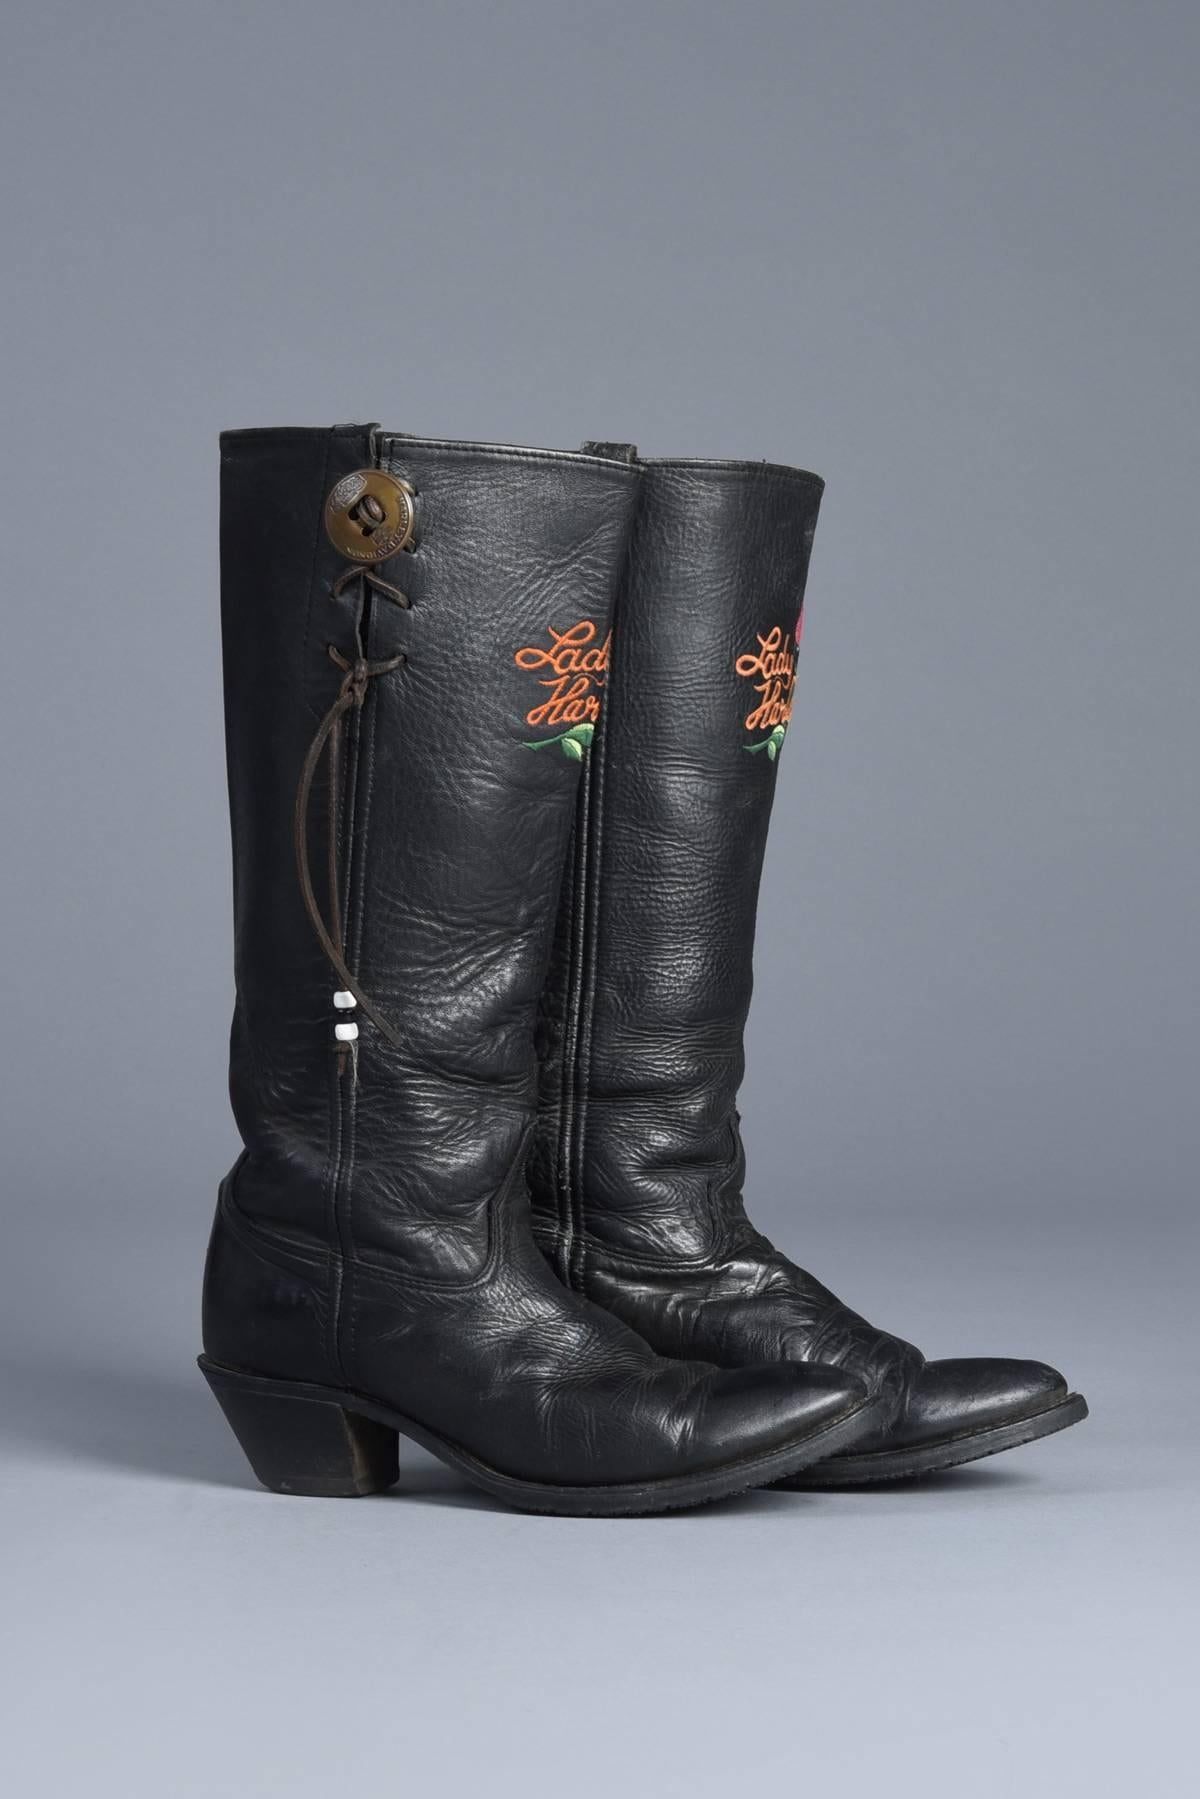 Lady Harley Motorcycle Boots with Embroidered Roses  For Sale 2